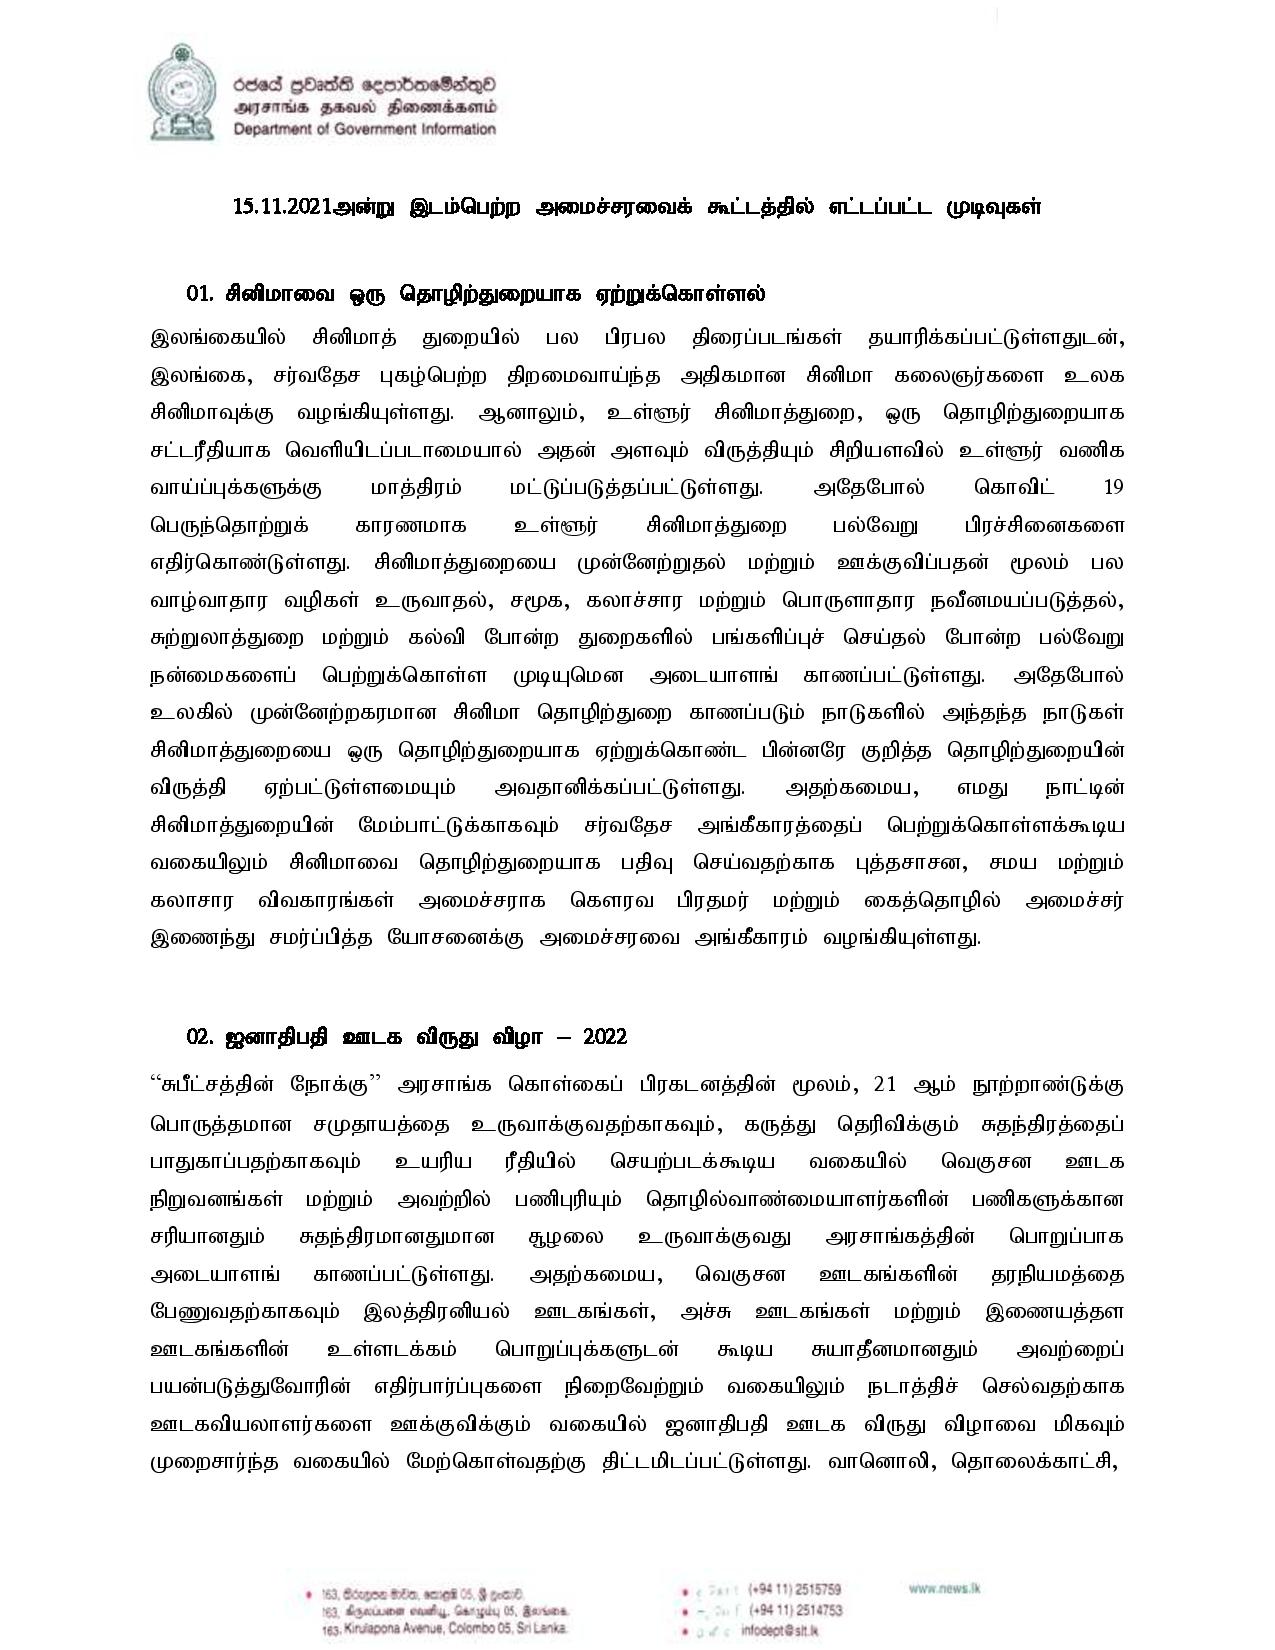 Cabinet Decision on 15.11.2021 Tamil page 001